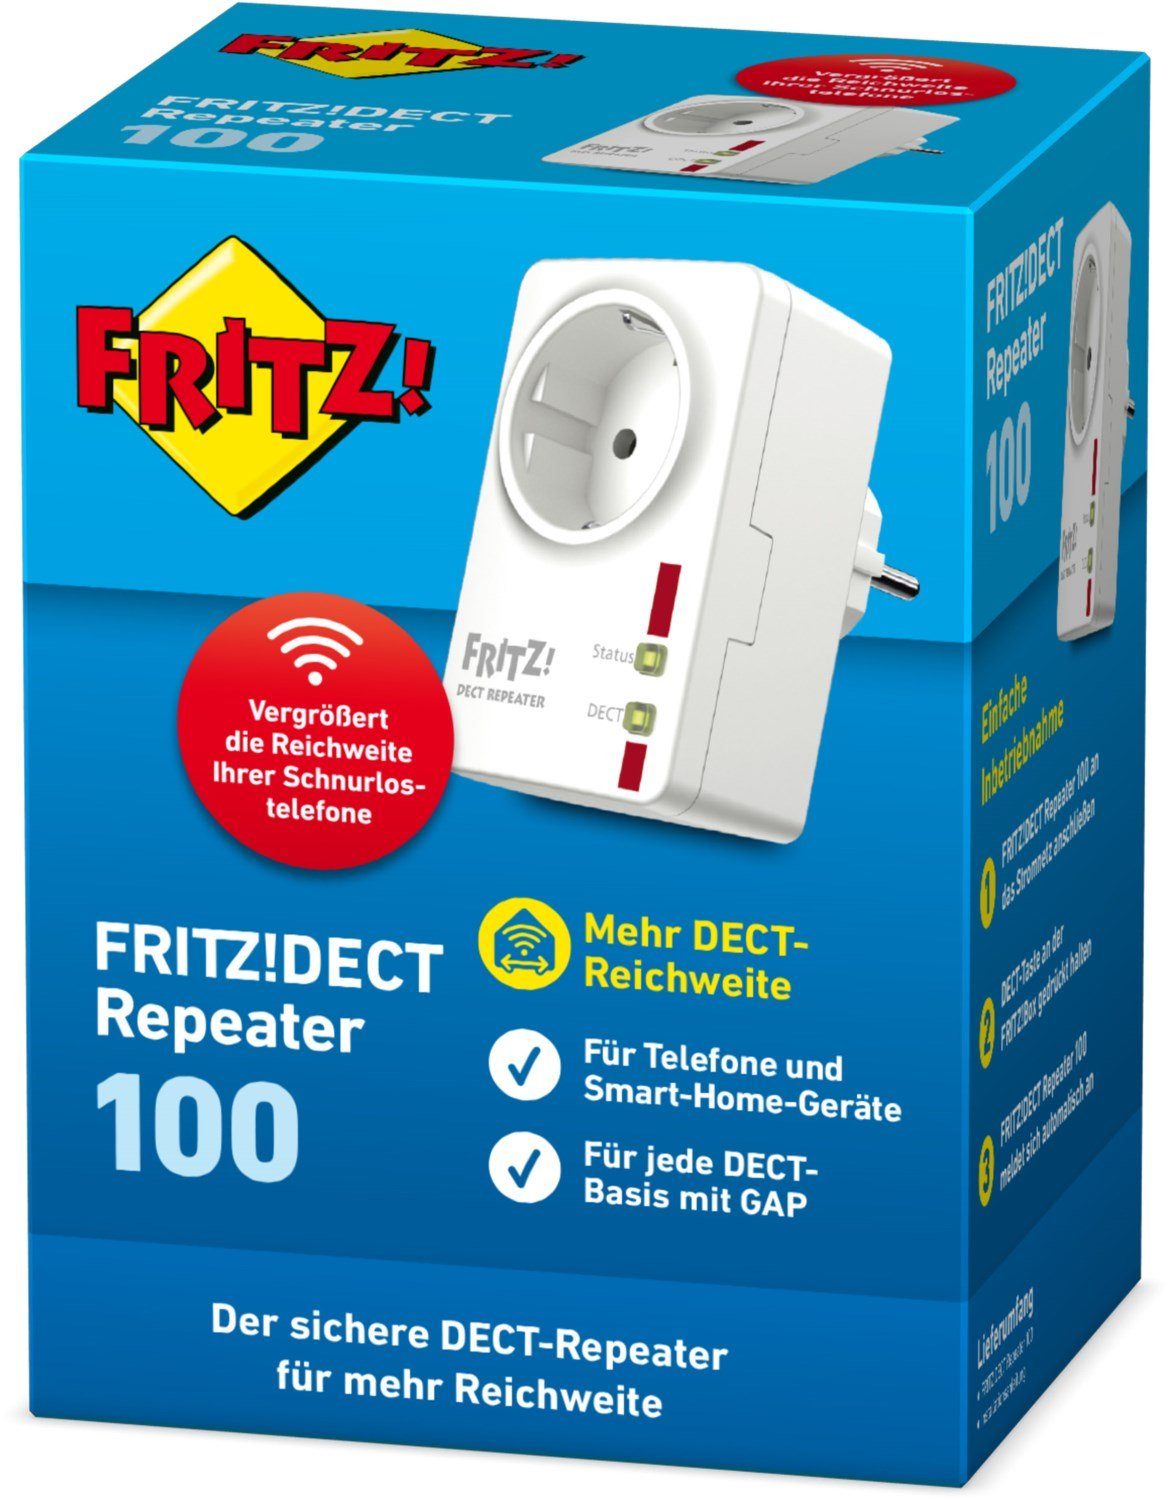 WLAN-Router 100 Repeater AVM Fritz! WLAN-Repeater FRITZ!DECT